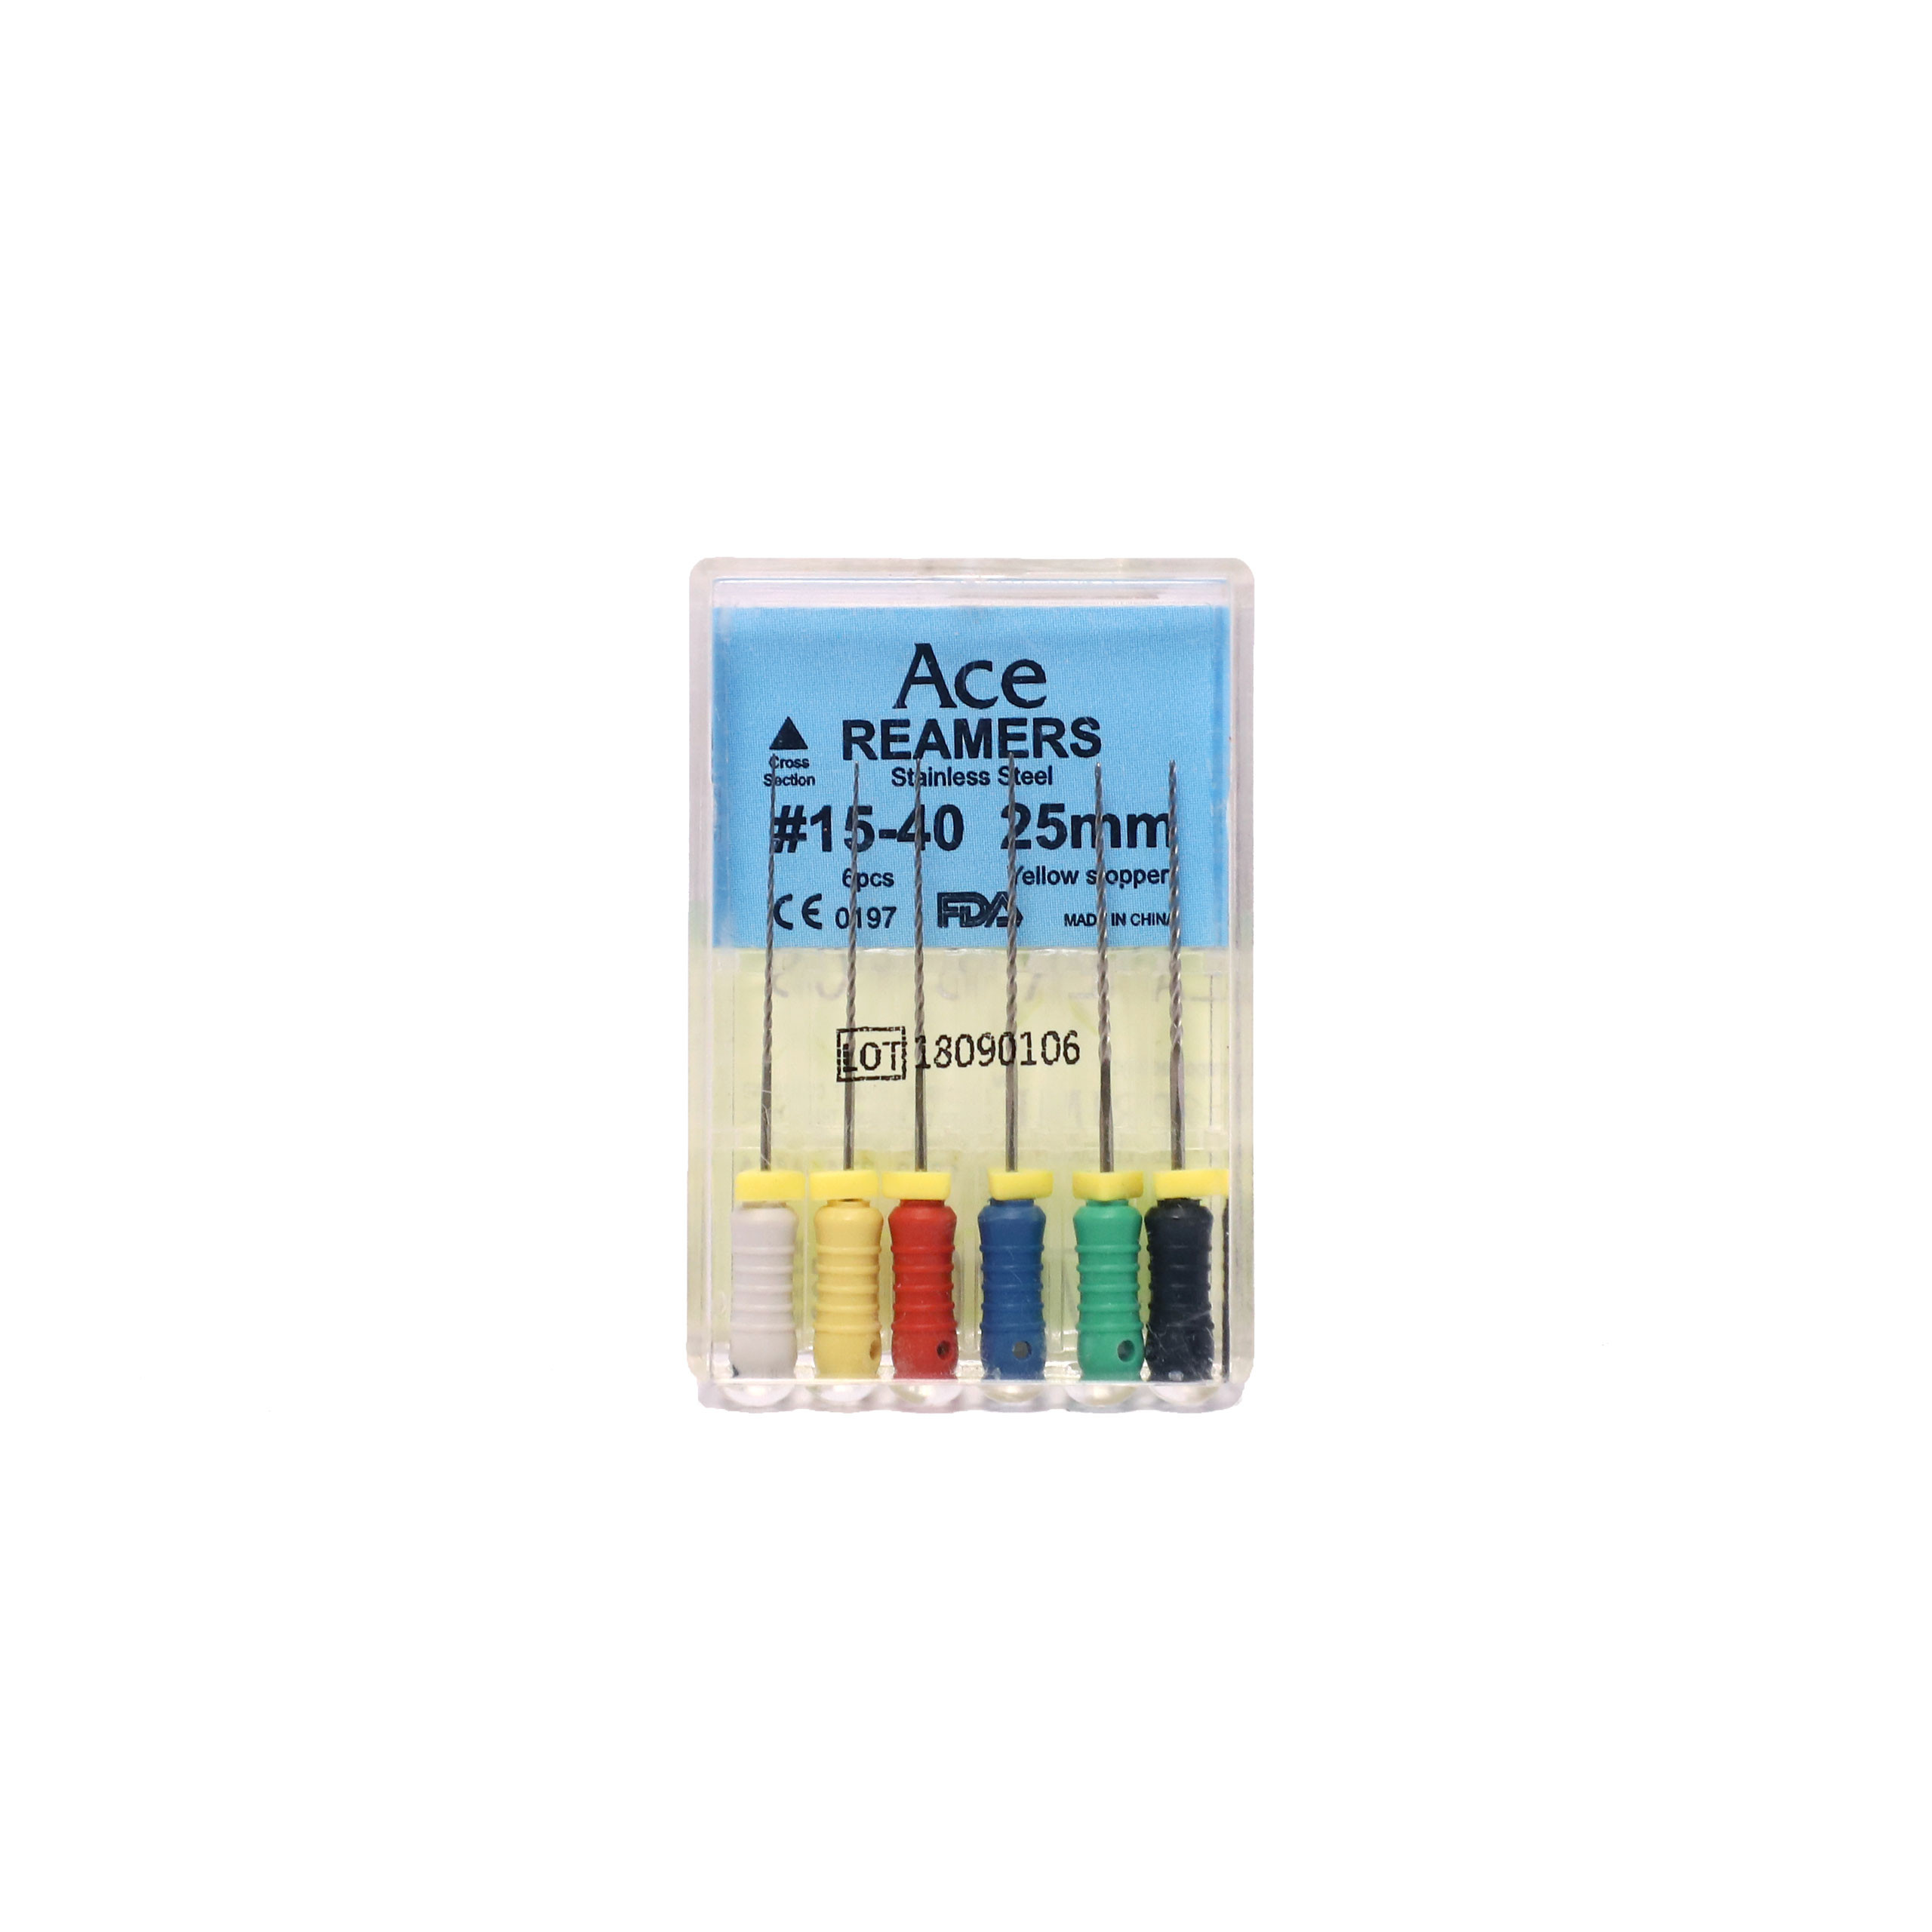 Ace Reamers #15-40 25mm  (Pack of 5)